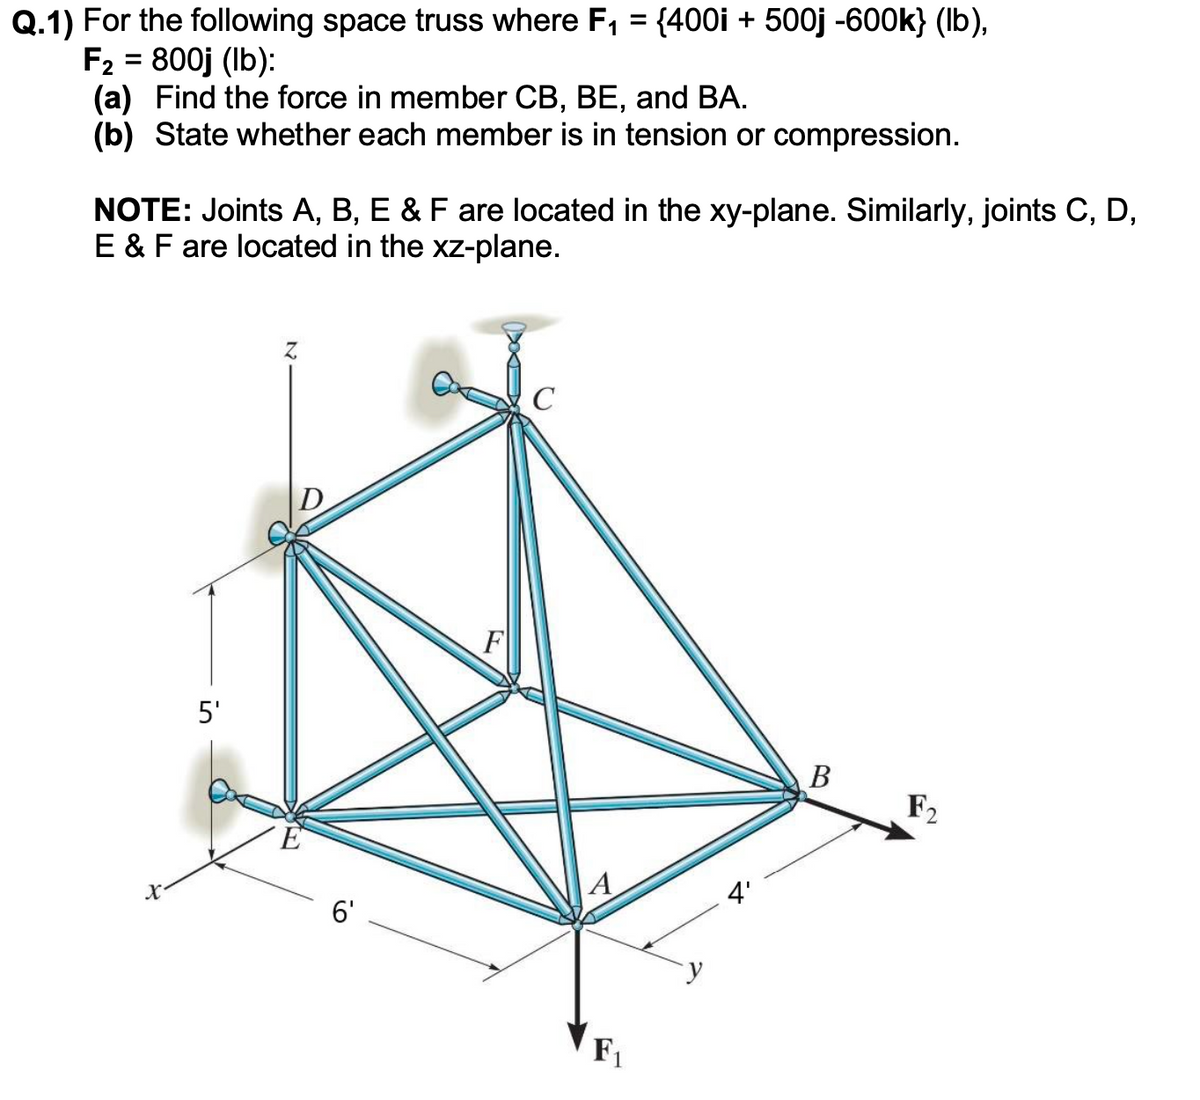 Q.1) For the following space truss where F₁ = {400i + 500j -600k} (lb),
F₂ = 800j (lb):
(a) Find the force in member CB, BE, and BA.
(b) State whether each member is in tension or compression.
NOTE: Joints A, B, E & F are located in the xy-plane. Similarly, joints C, D,
E & F are located in the xz-plane.
Z
C
B
5'
6'
F
1
4'
F₂